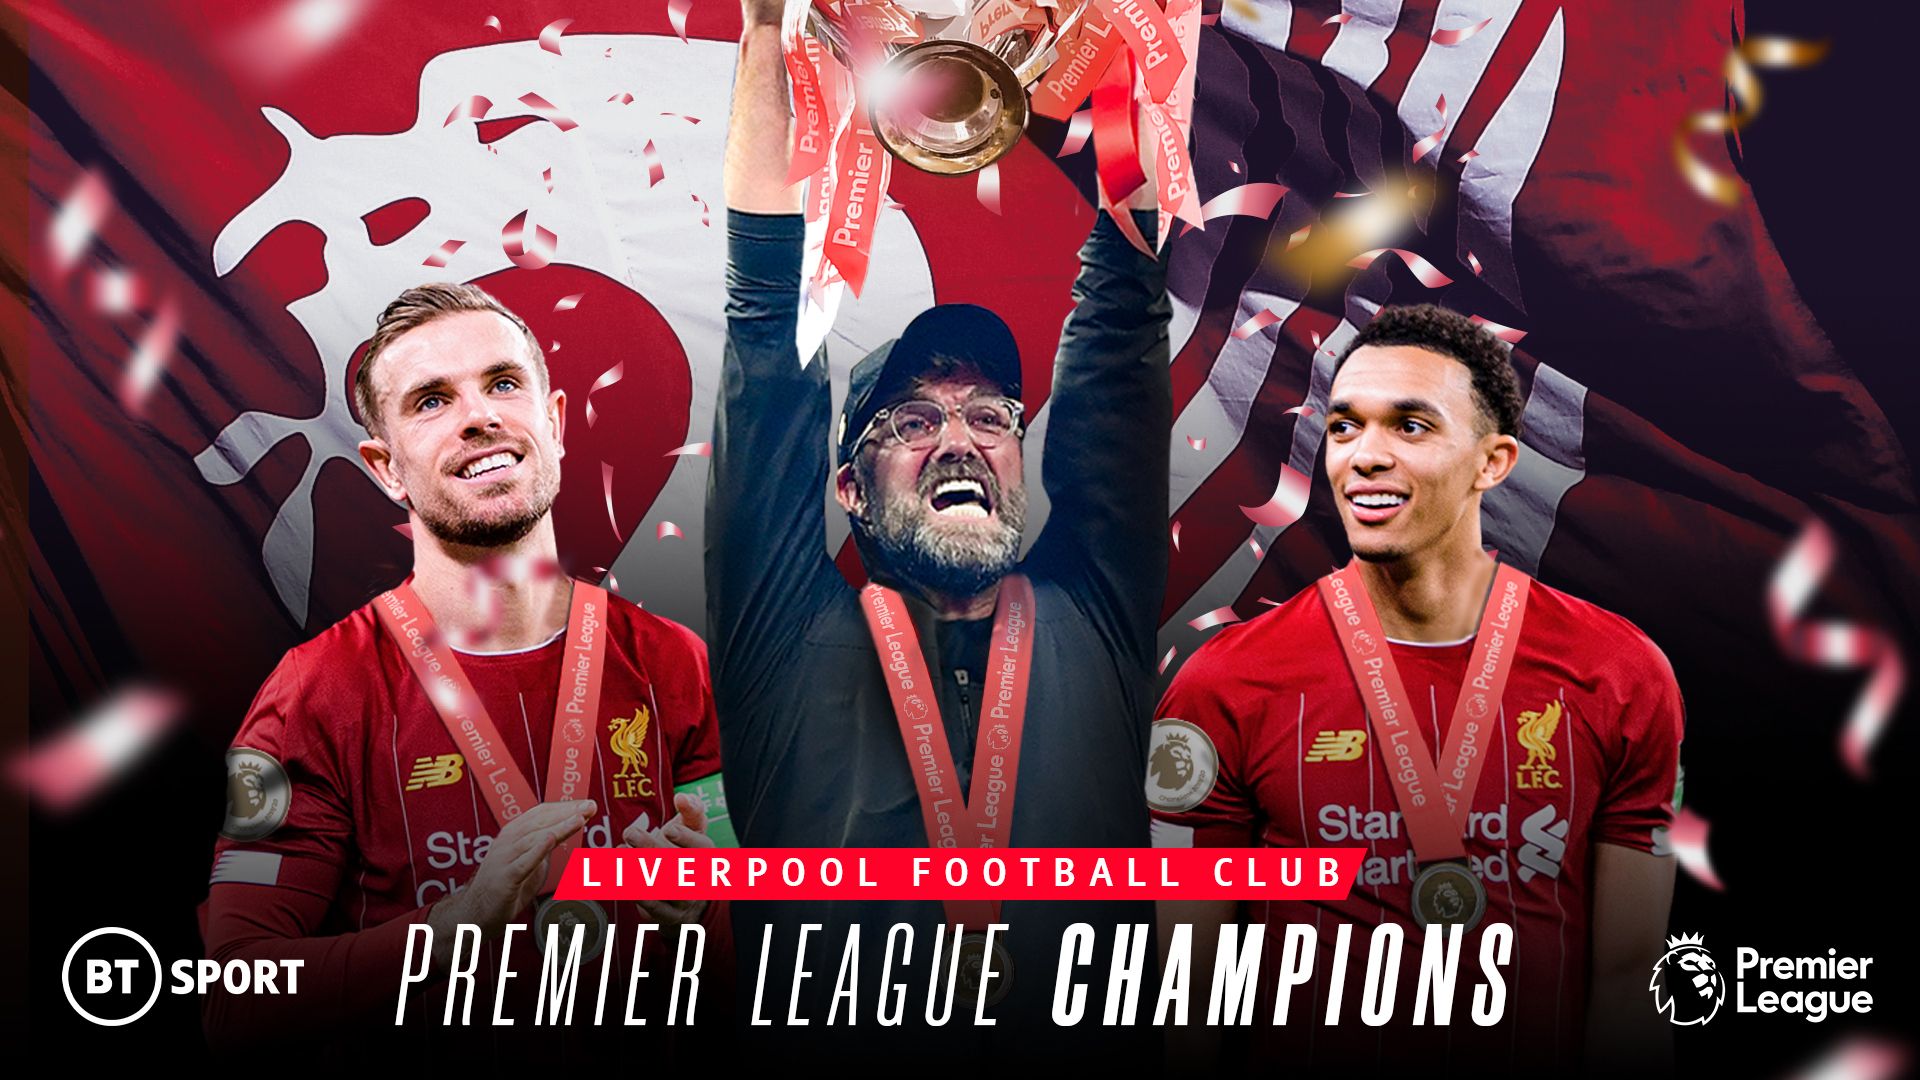 The story of Liverpool's title triumph